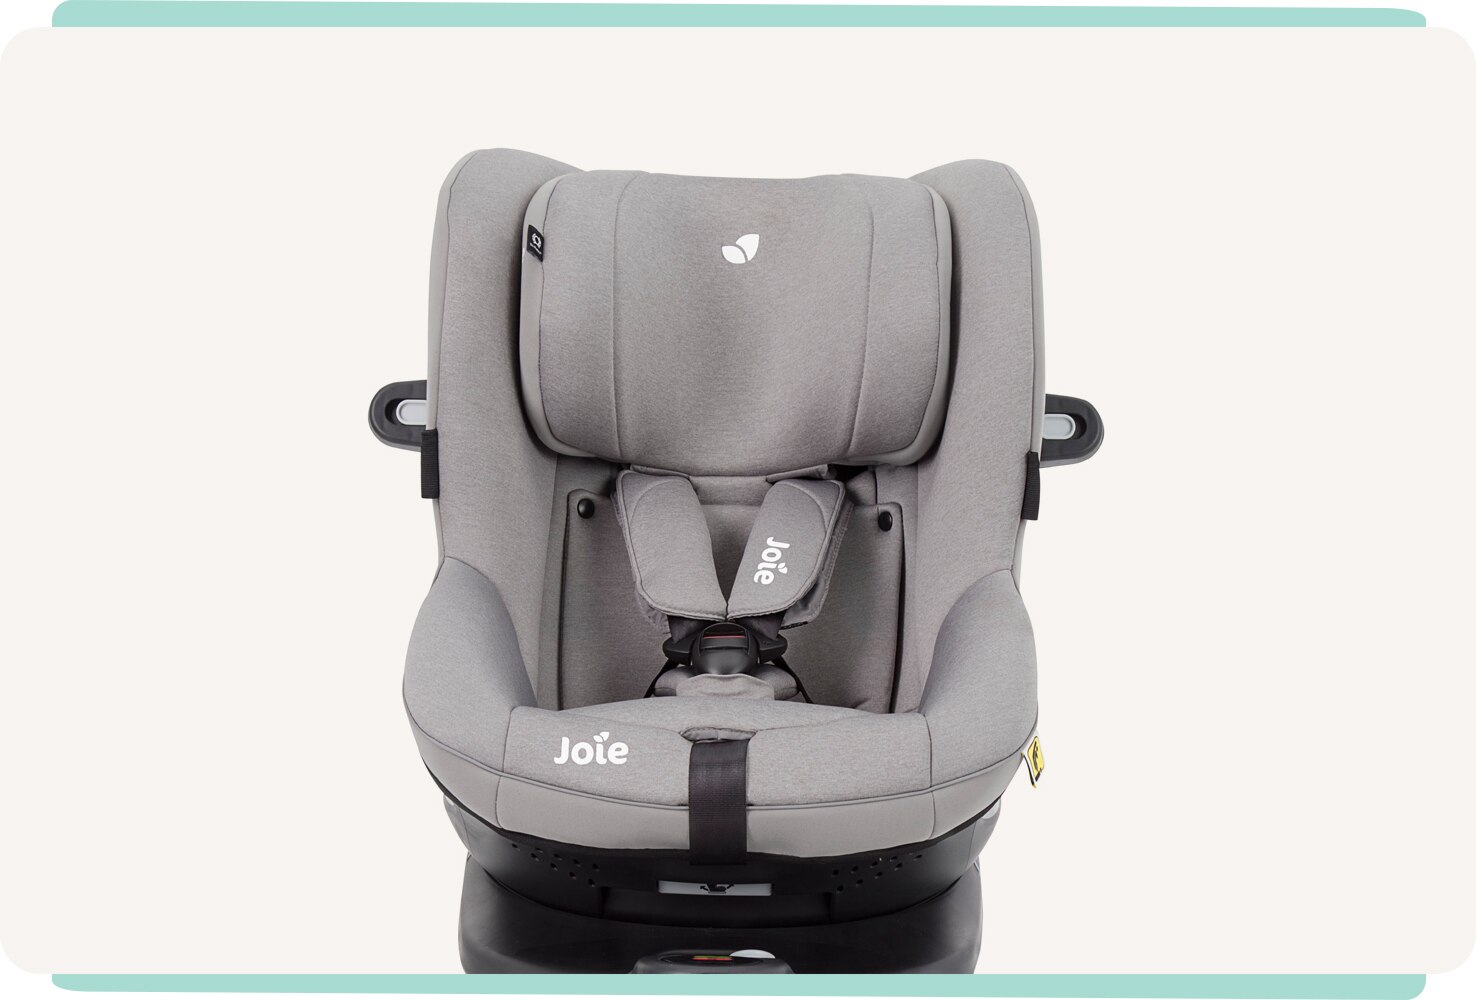    Joie I-Spin 360 E spinning car seat in light gray facing straight on.